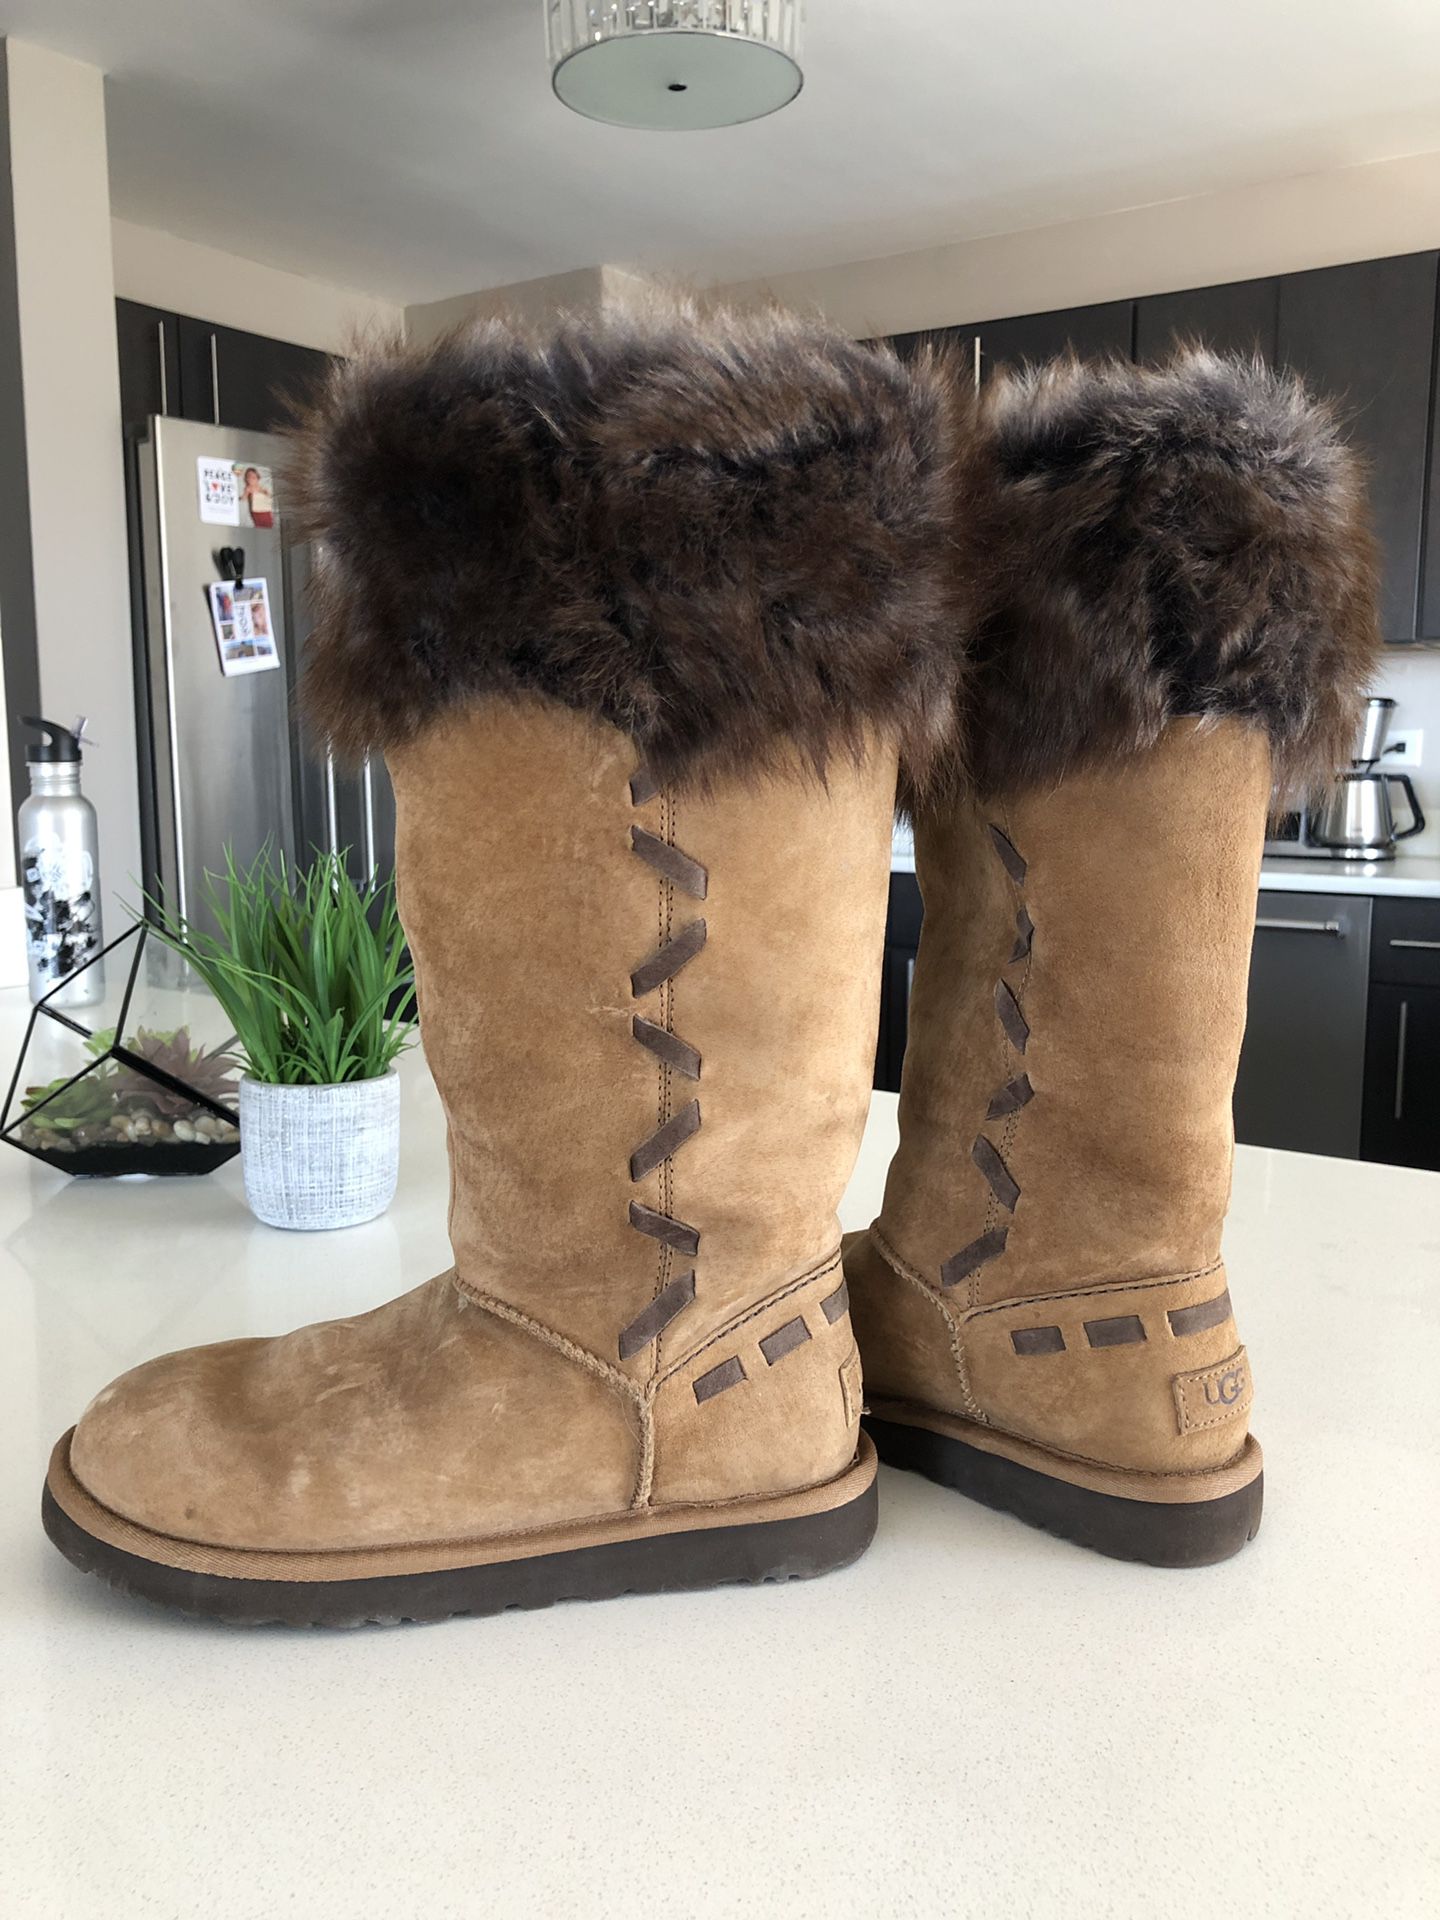 Furry Ugg Boots - Brand New, Size 7